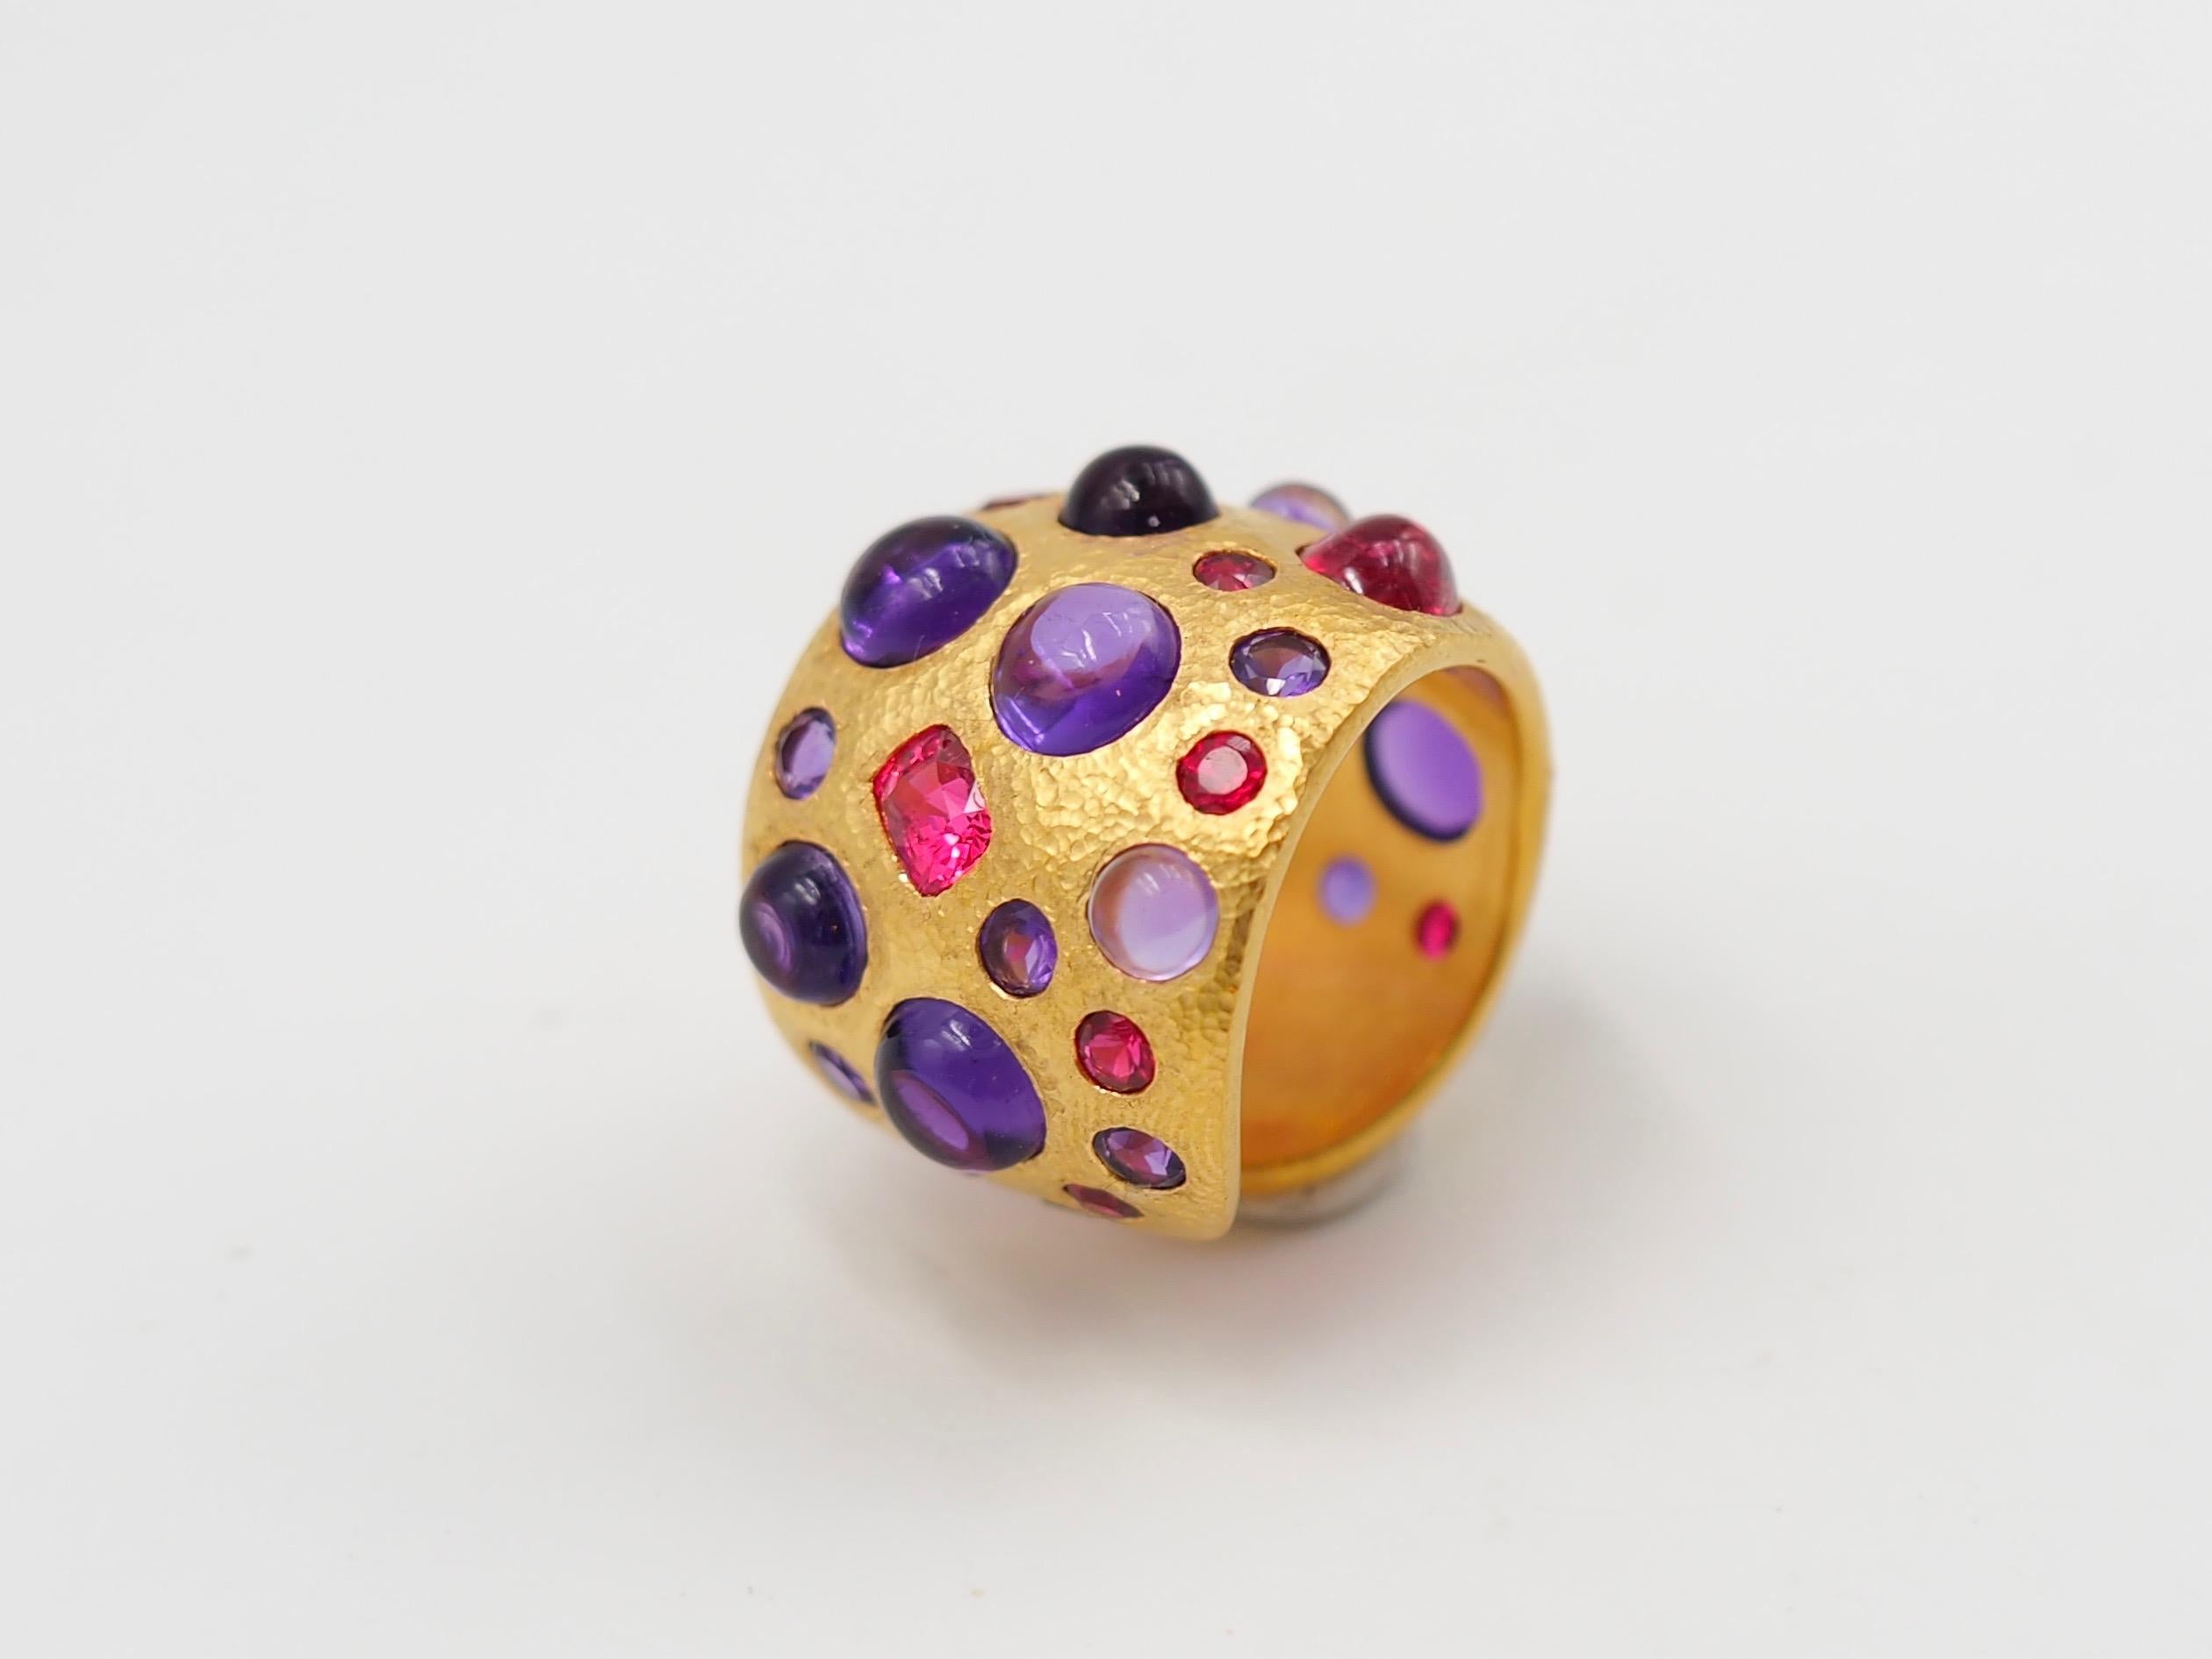 This modern Band ring by Scrives is hand-hammered and set with:
- 2 natural red spinels (cushion shape), 
- 1 natural red spinel cabochon, 
- 8 amethyst cabochons of various sizes, 
- 8 faceted natural red spinels, 
- 11 faceted amethysts. 
The